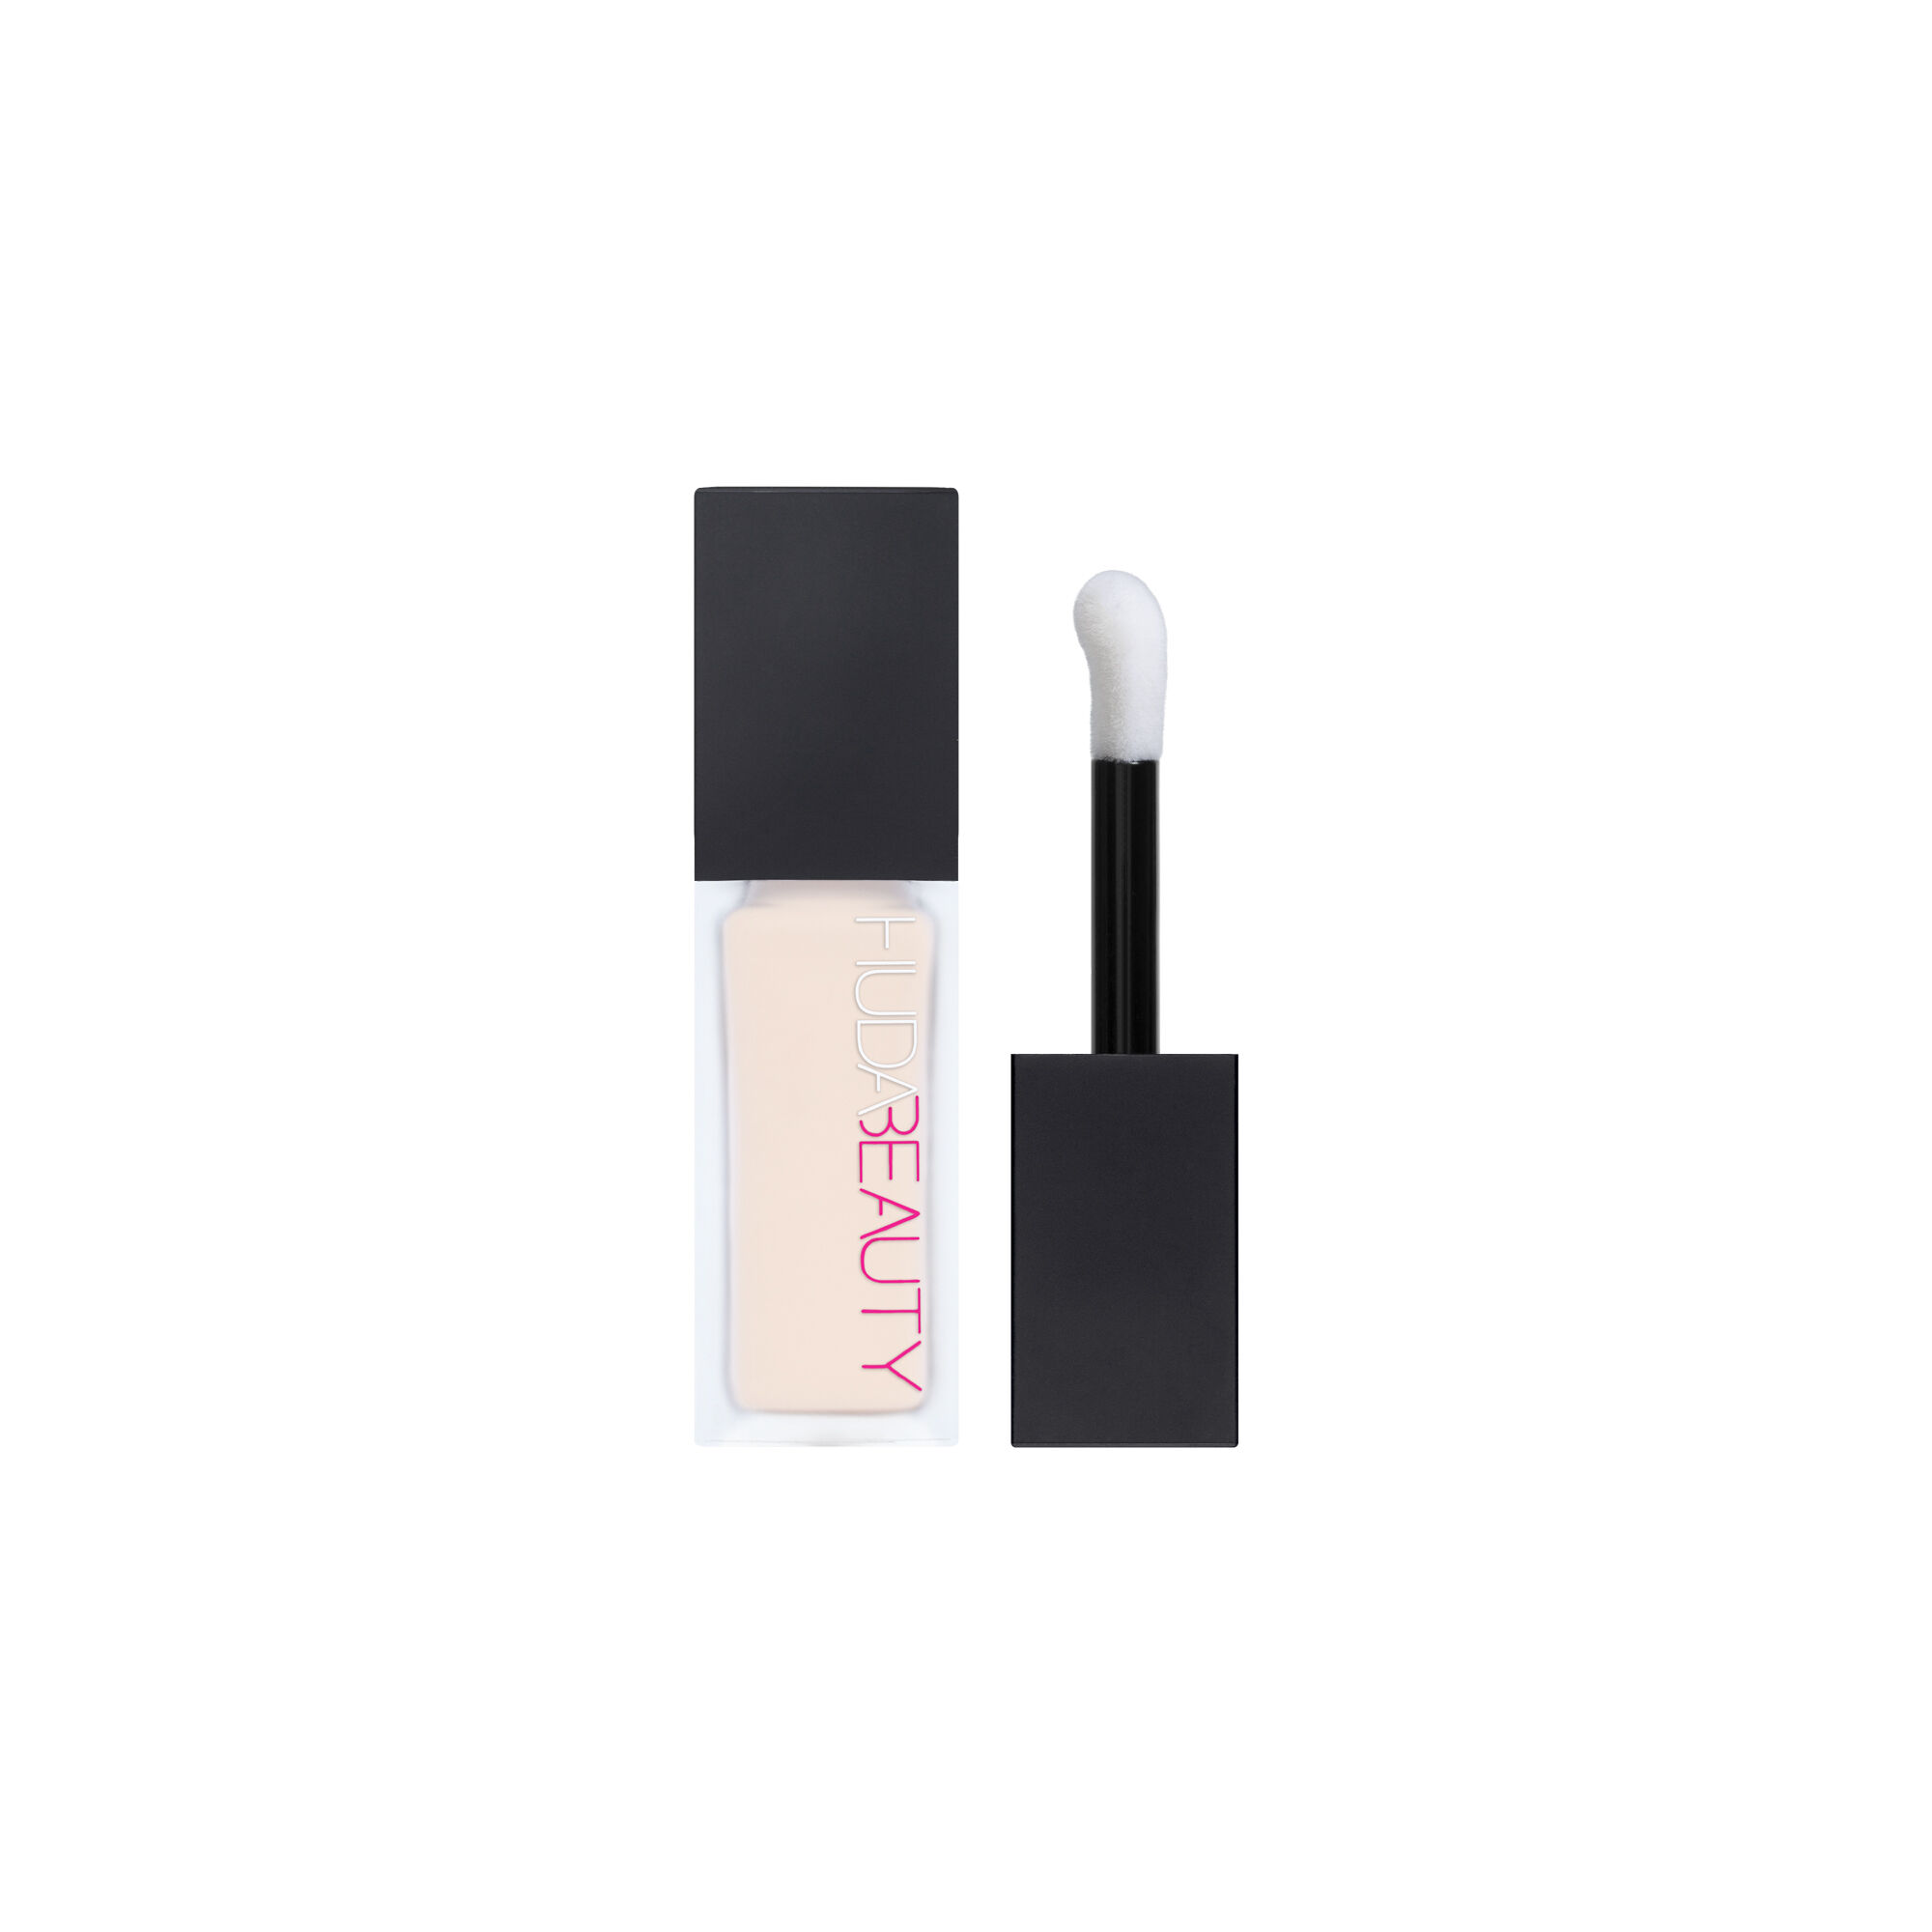 Huda Beauty Faux Filter Concealer Whipped Cream 0.1 In Whipped Cream 0.1g